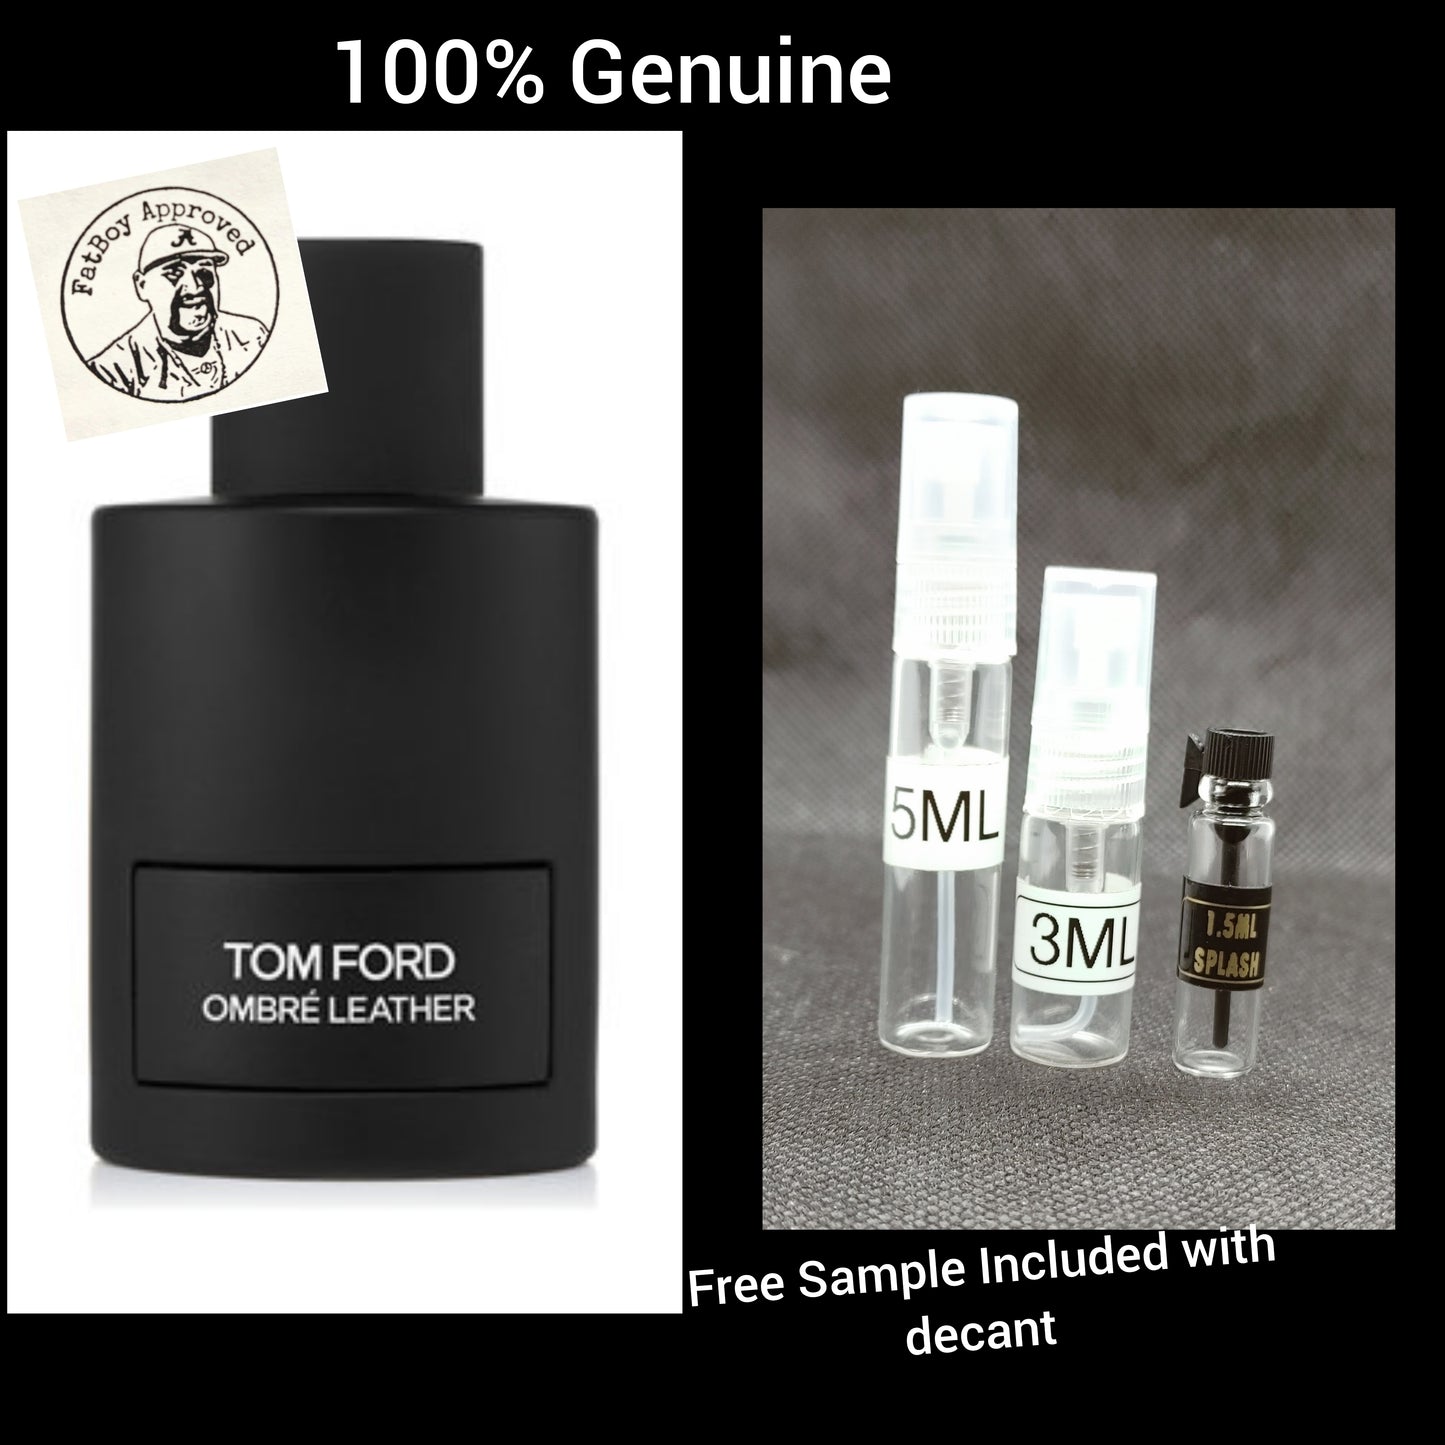 Ombré Leather Tom Ford Decants